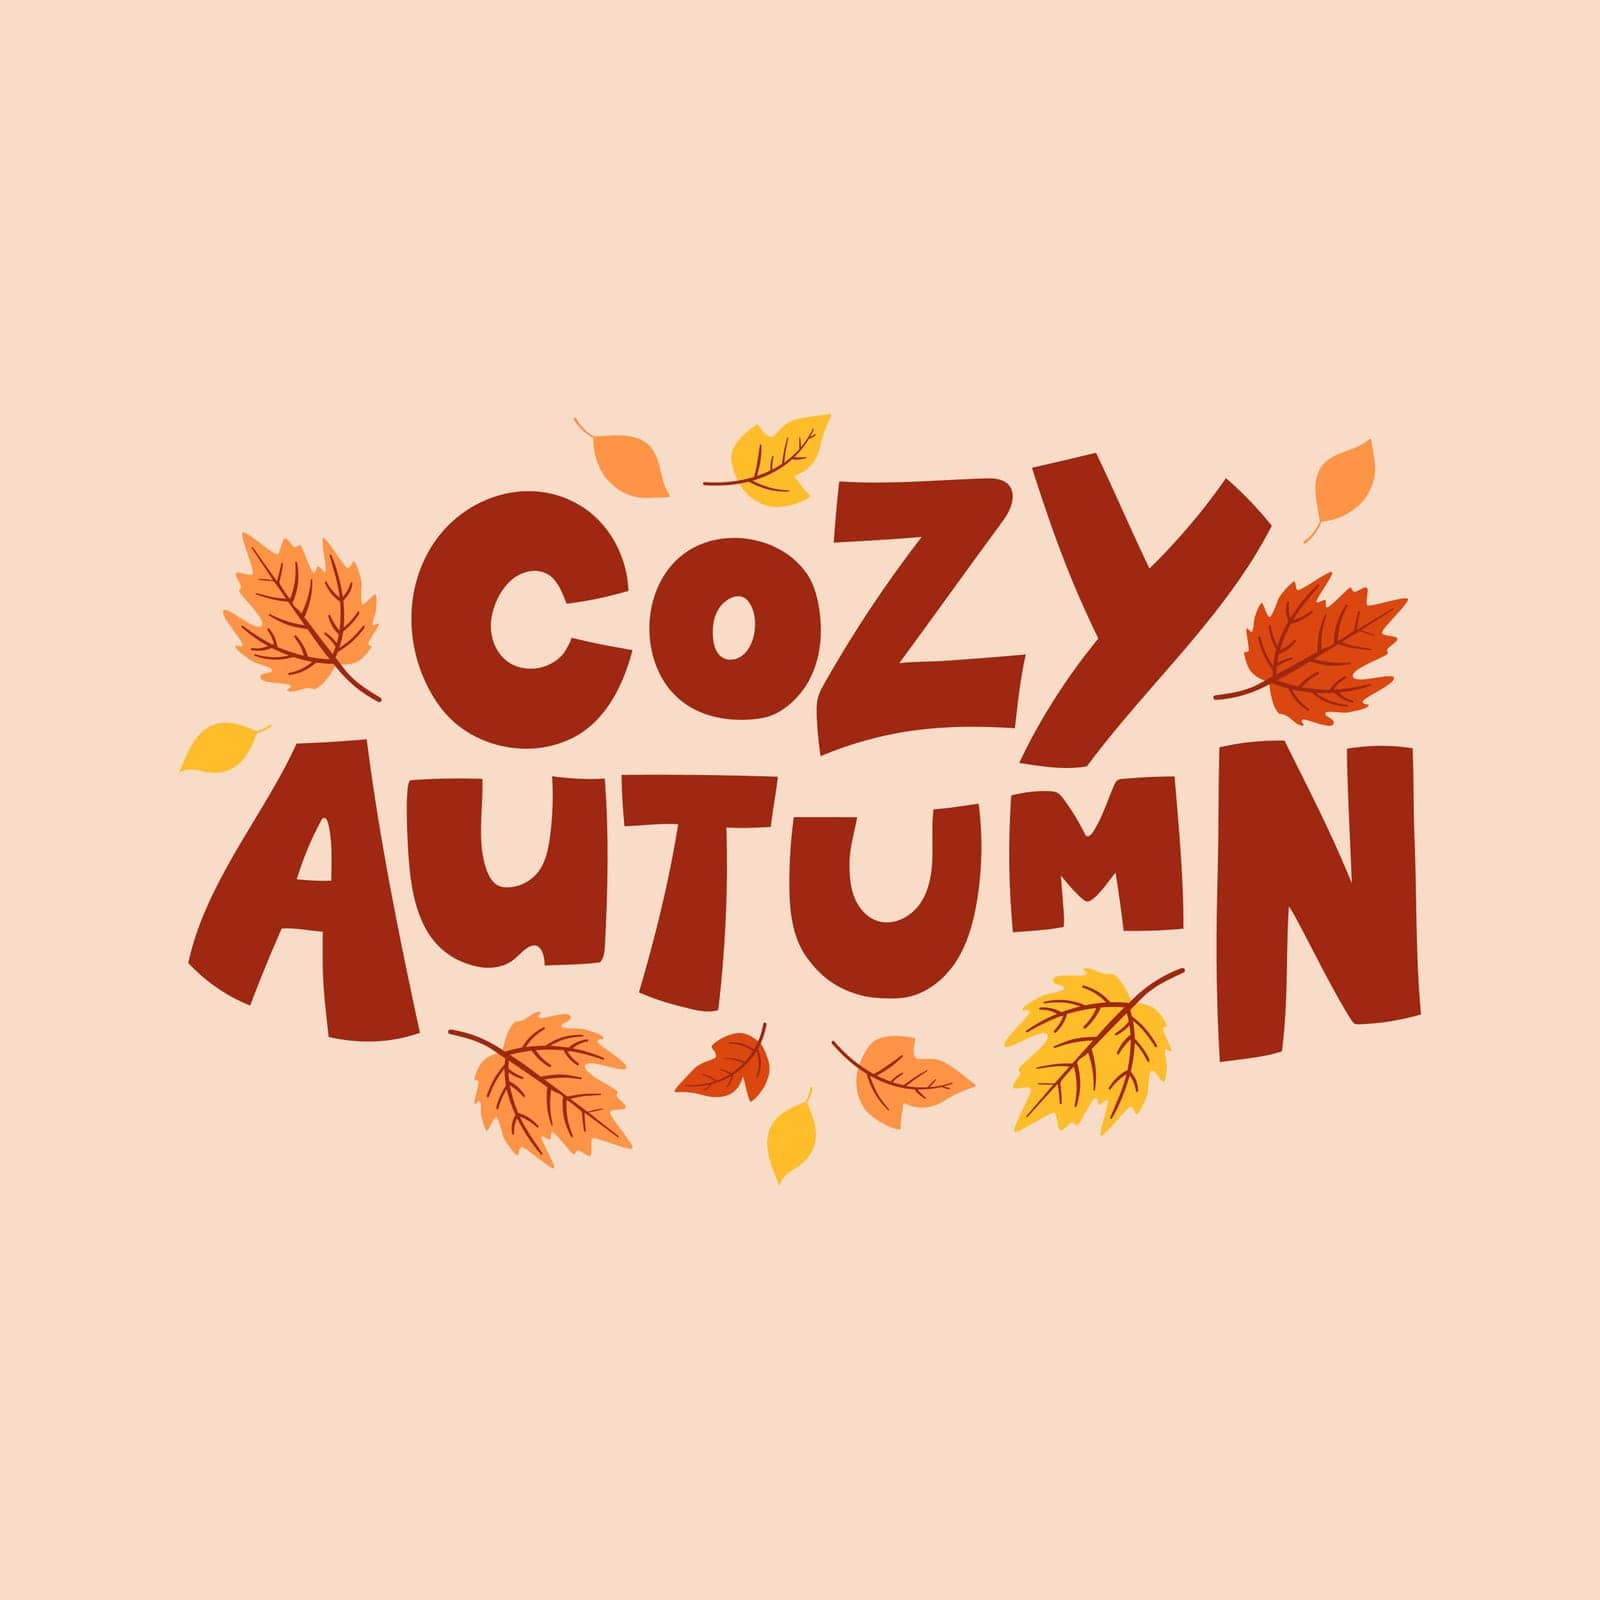 Cozy autumn hand drawn lettering and leaves. Template for autumn design. by Yarynabo